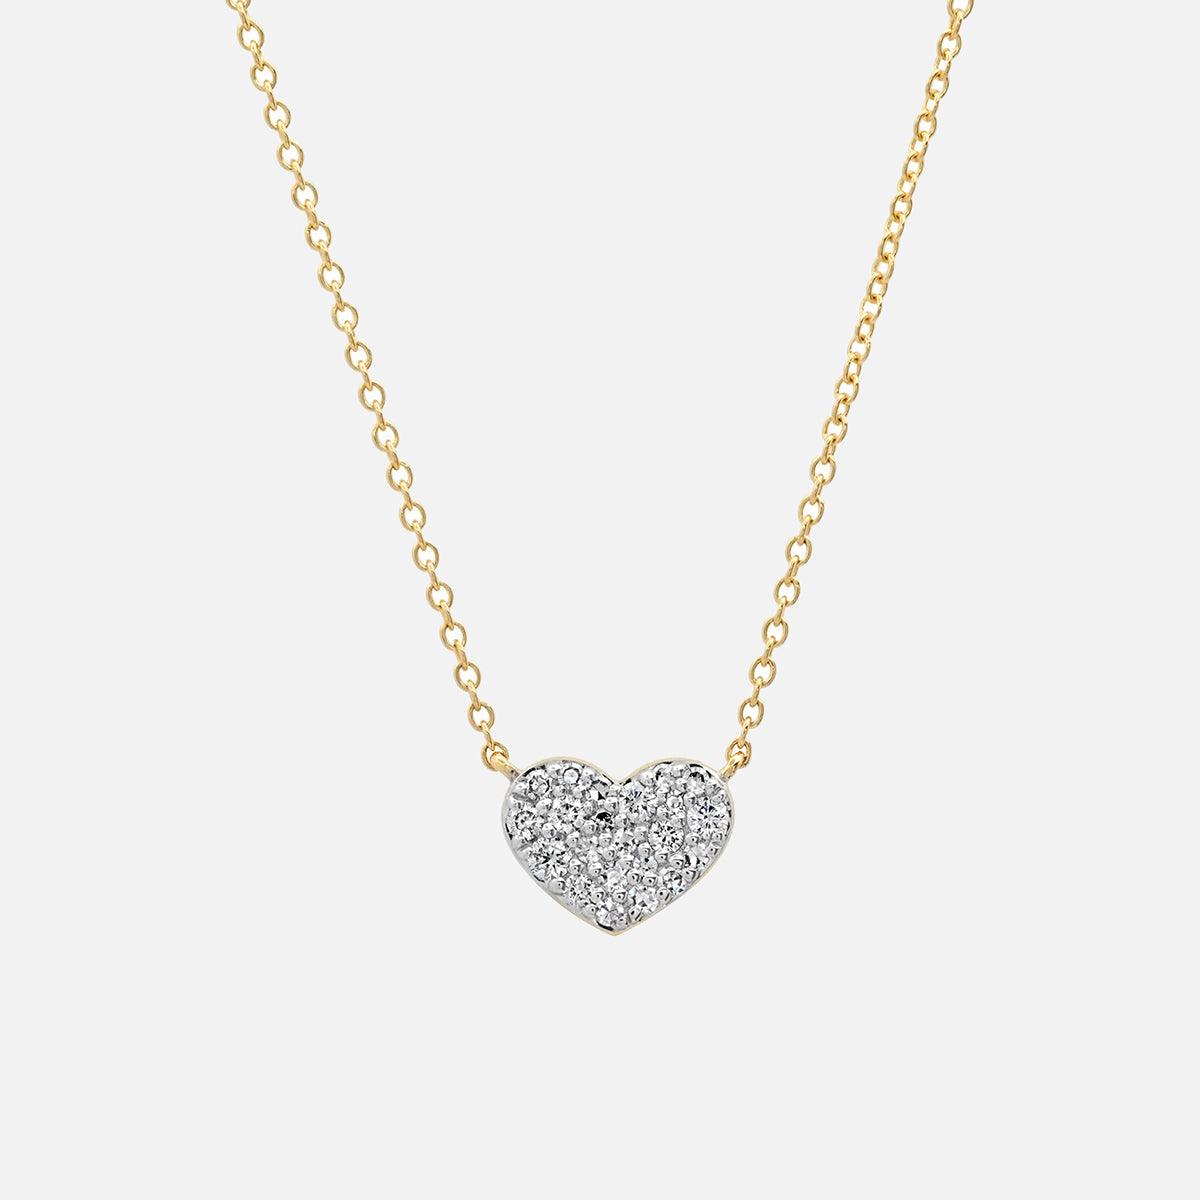 Eriness Diamond Smushed Heart Necklace - At Present Jewelry